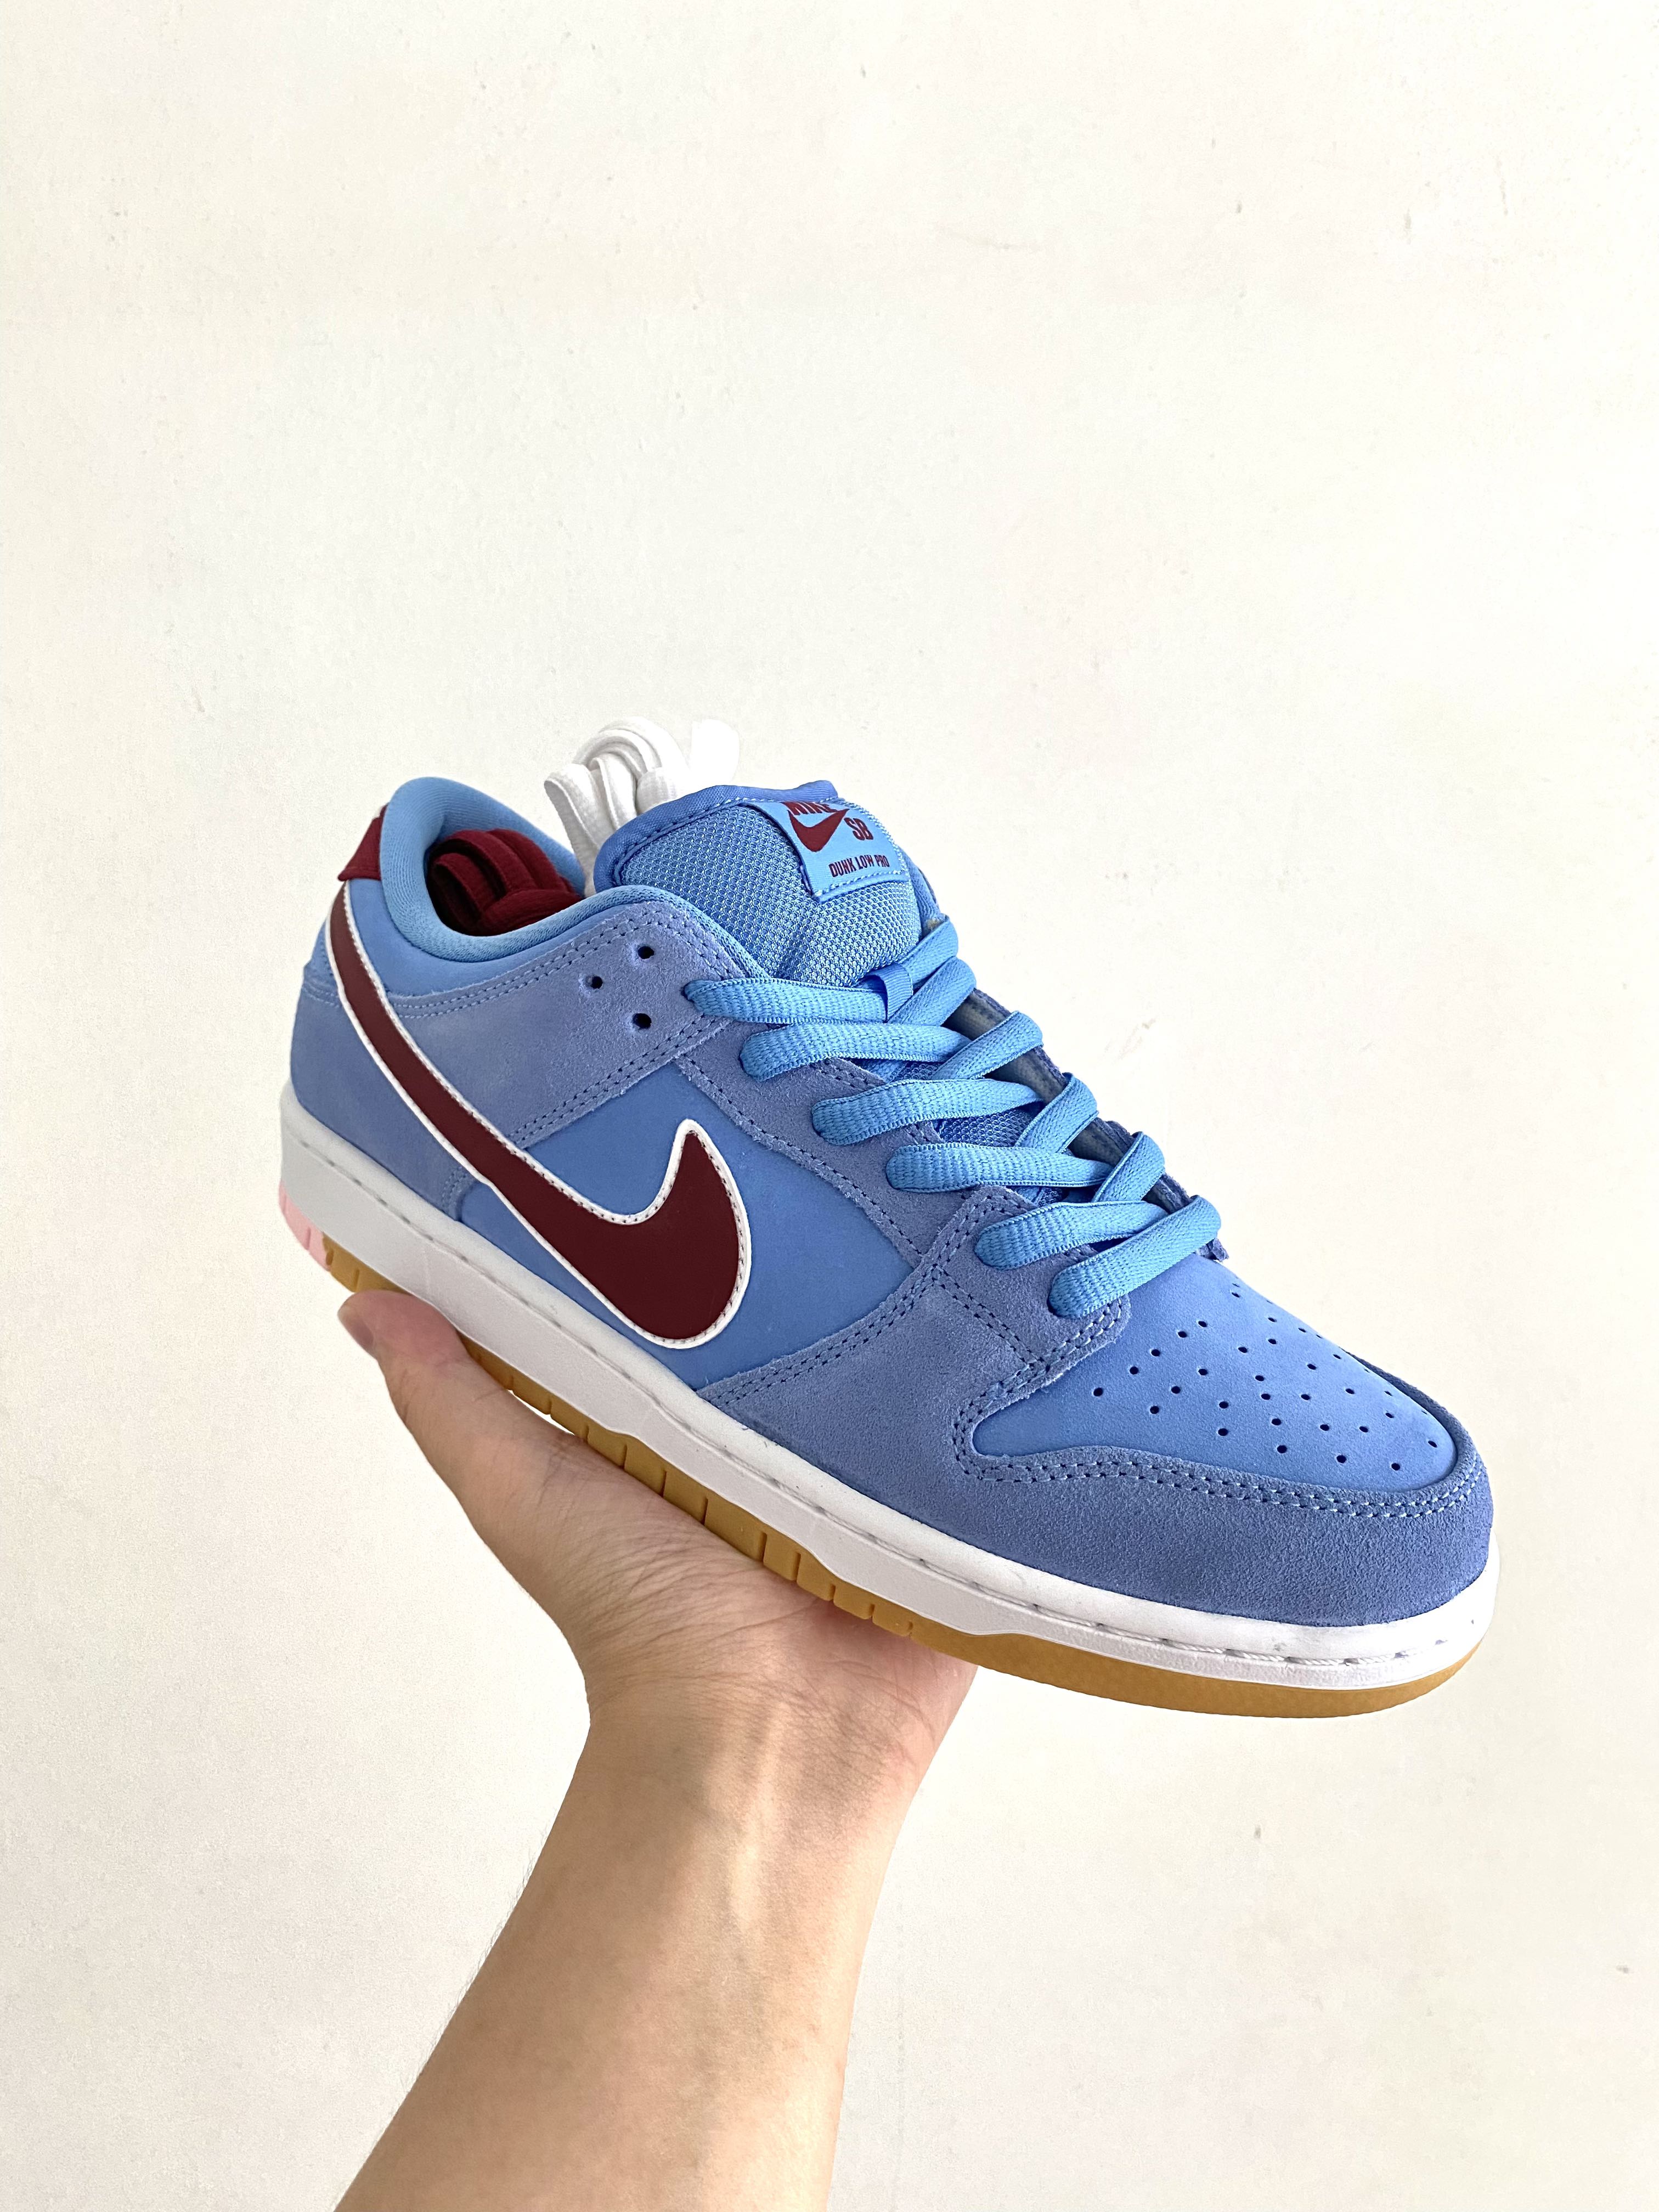 Dunk Low Pro Valor Blue and Team Maroon"